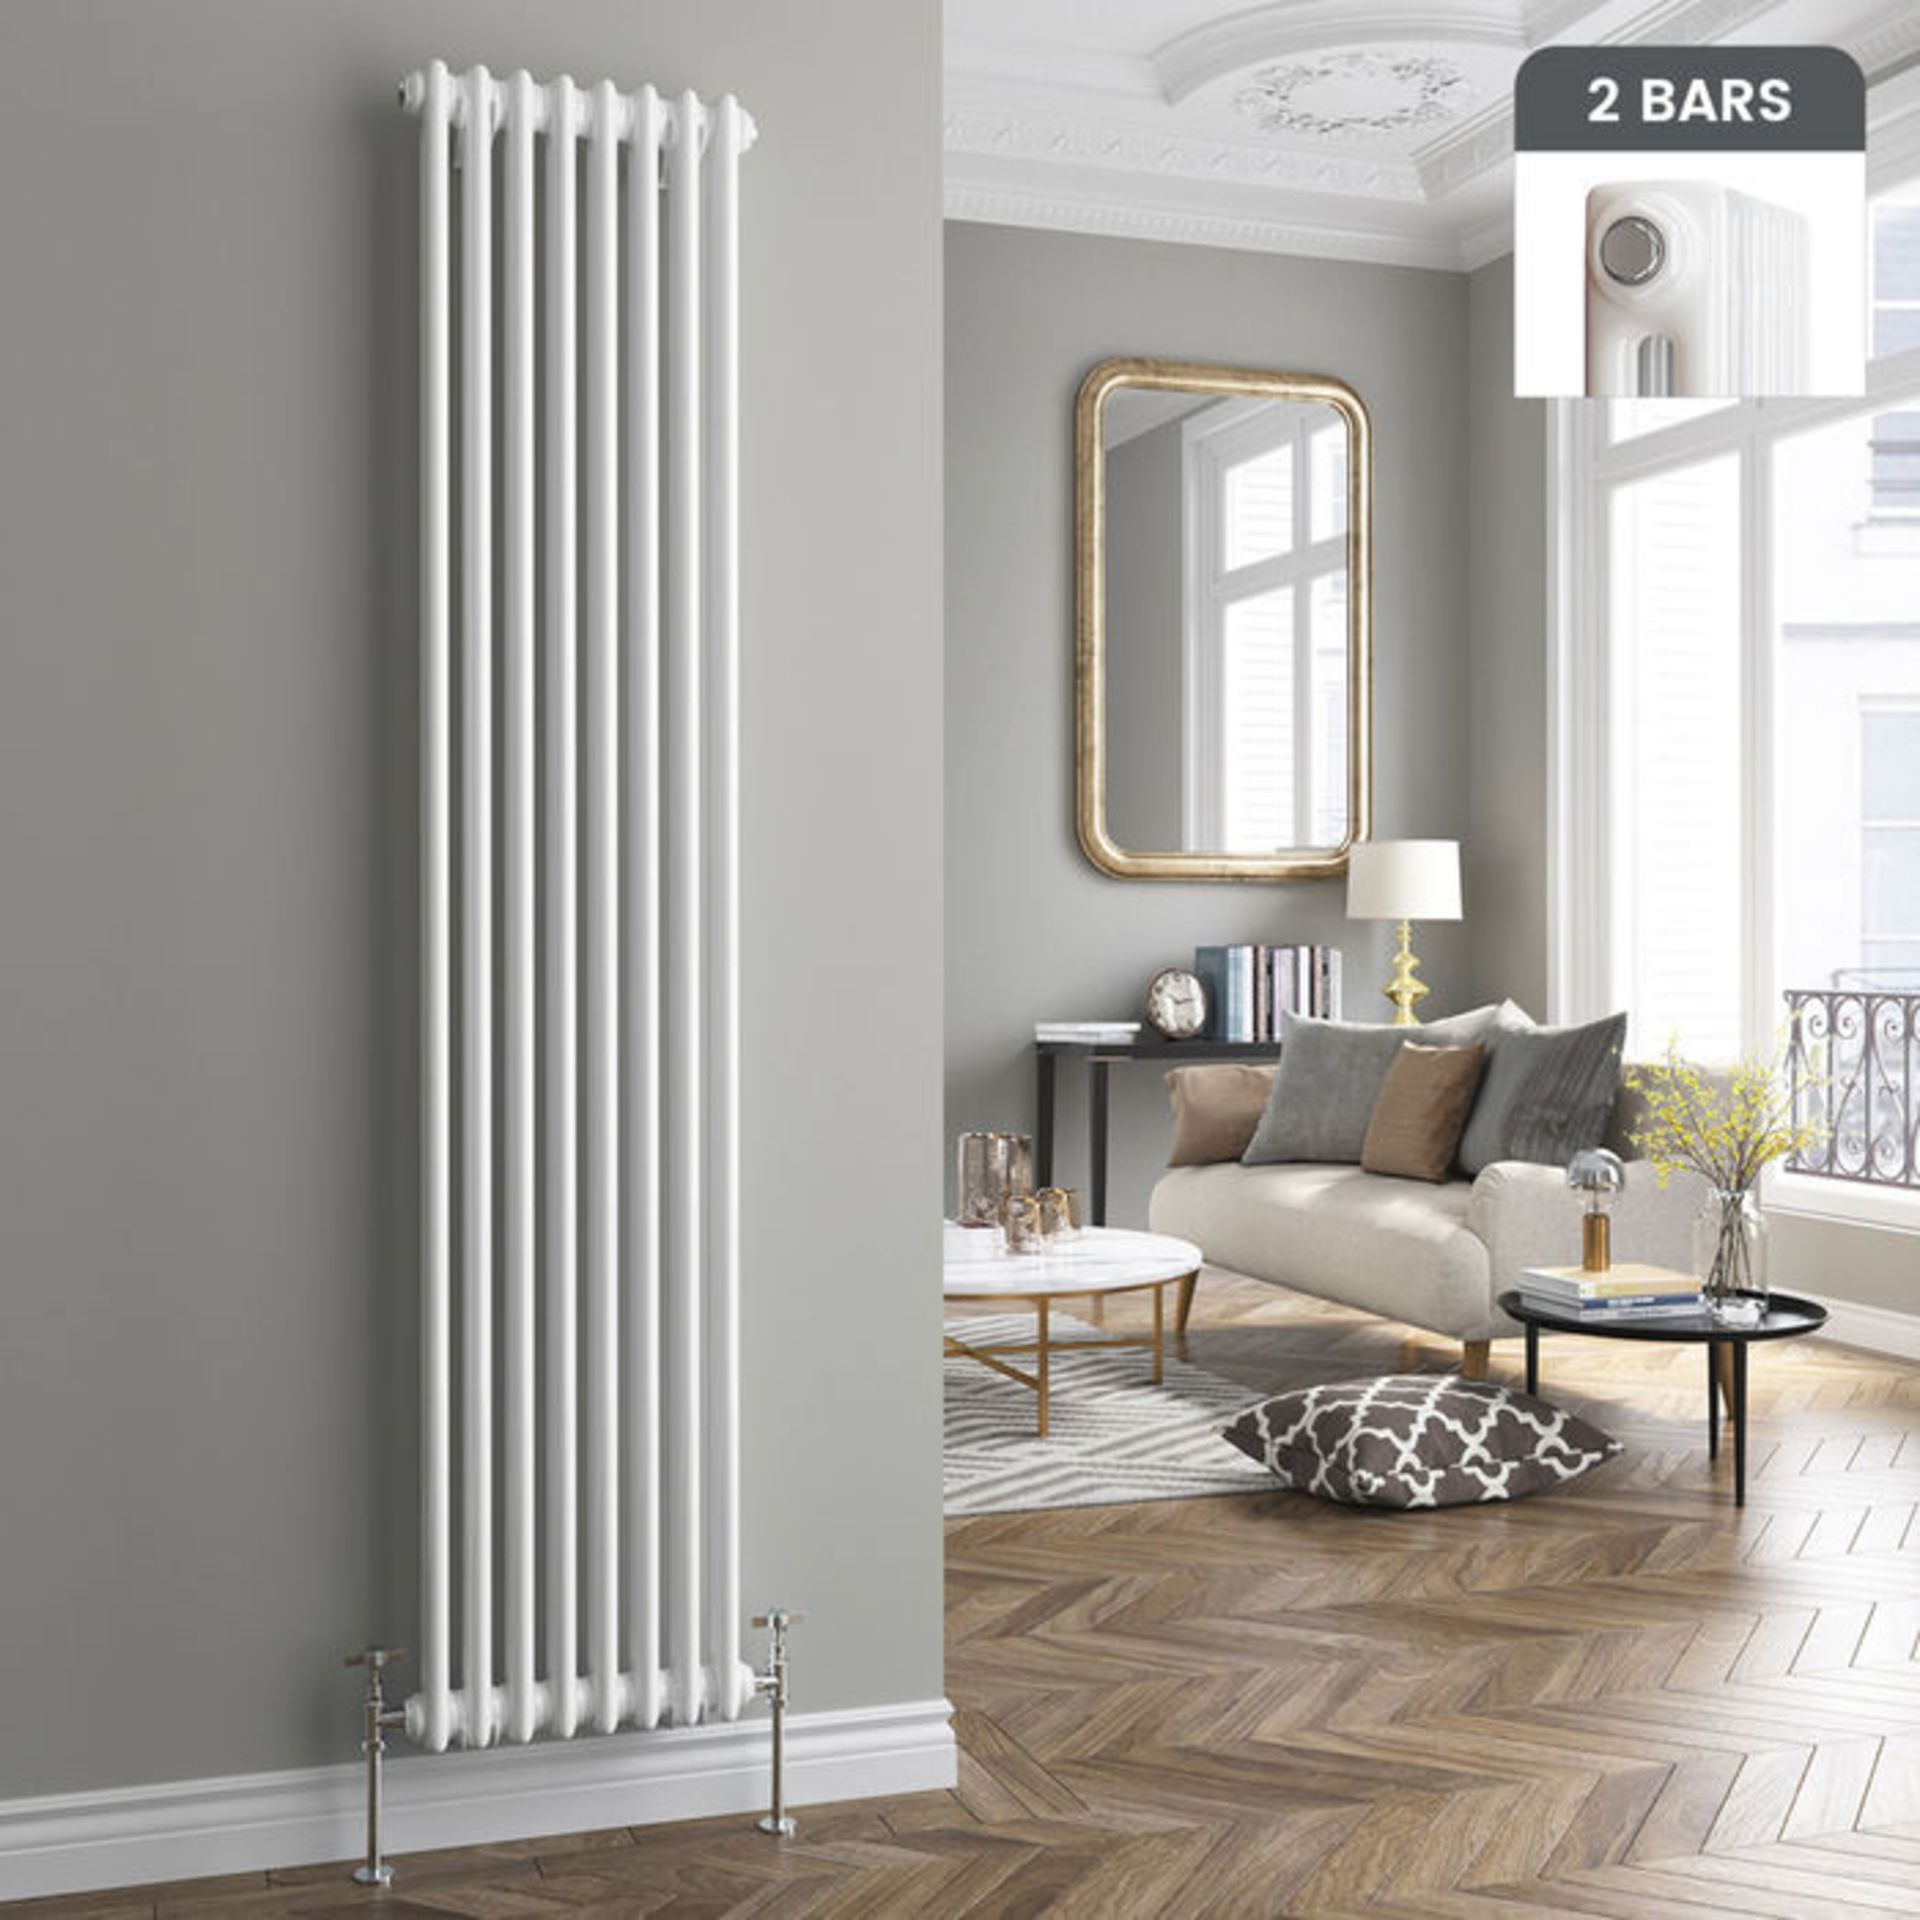 (W113) 1800x380mm White Double Panel Vertical Colosseum Traditional Radiator. RRP £358.99. Made from